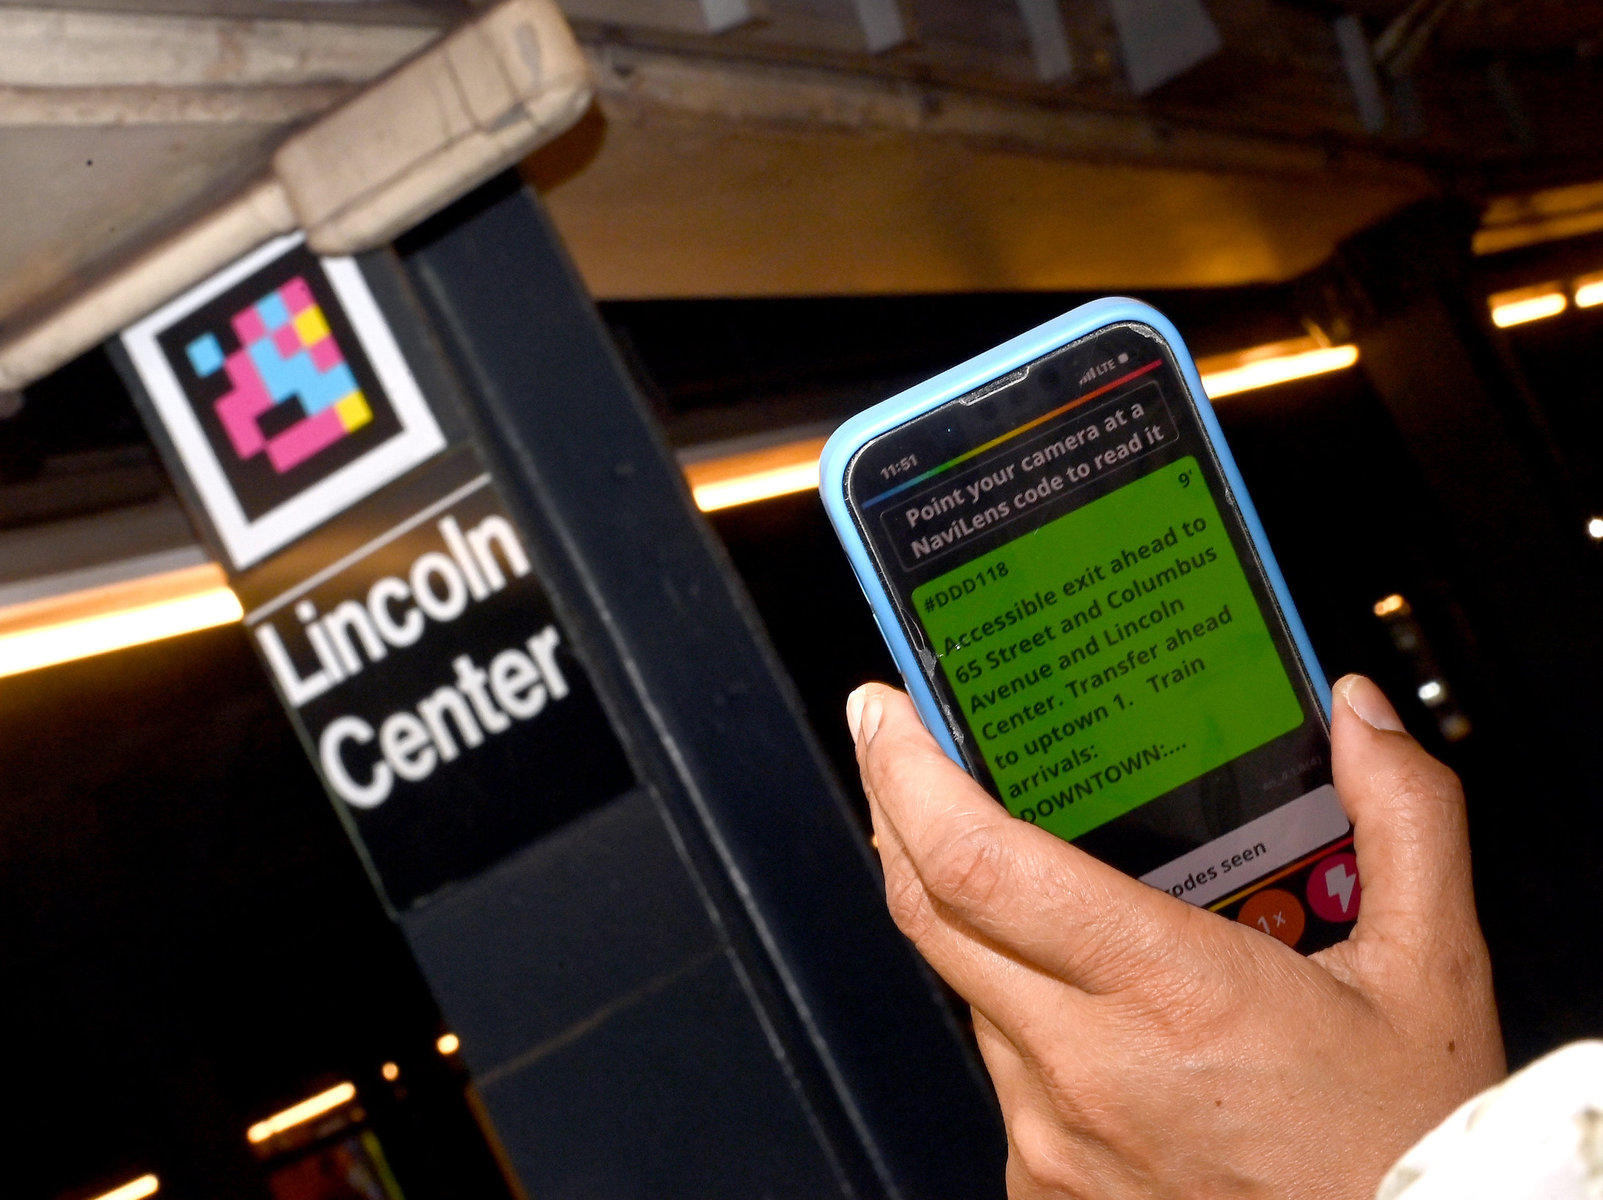 A phone using the NaviLens app is being held up to a NaviLens code at the Lincoln Center subway station.